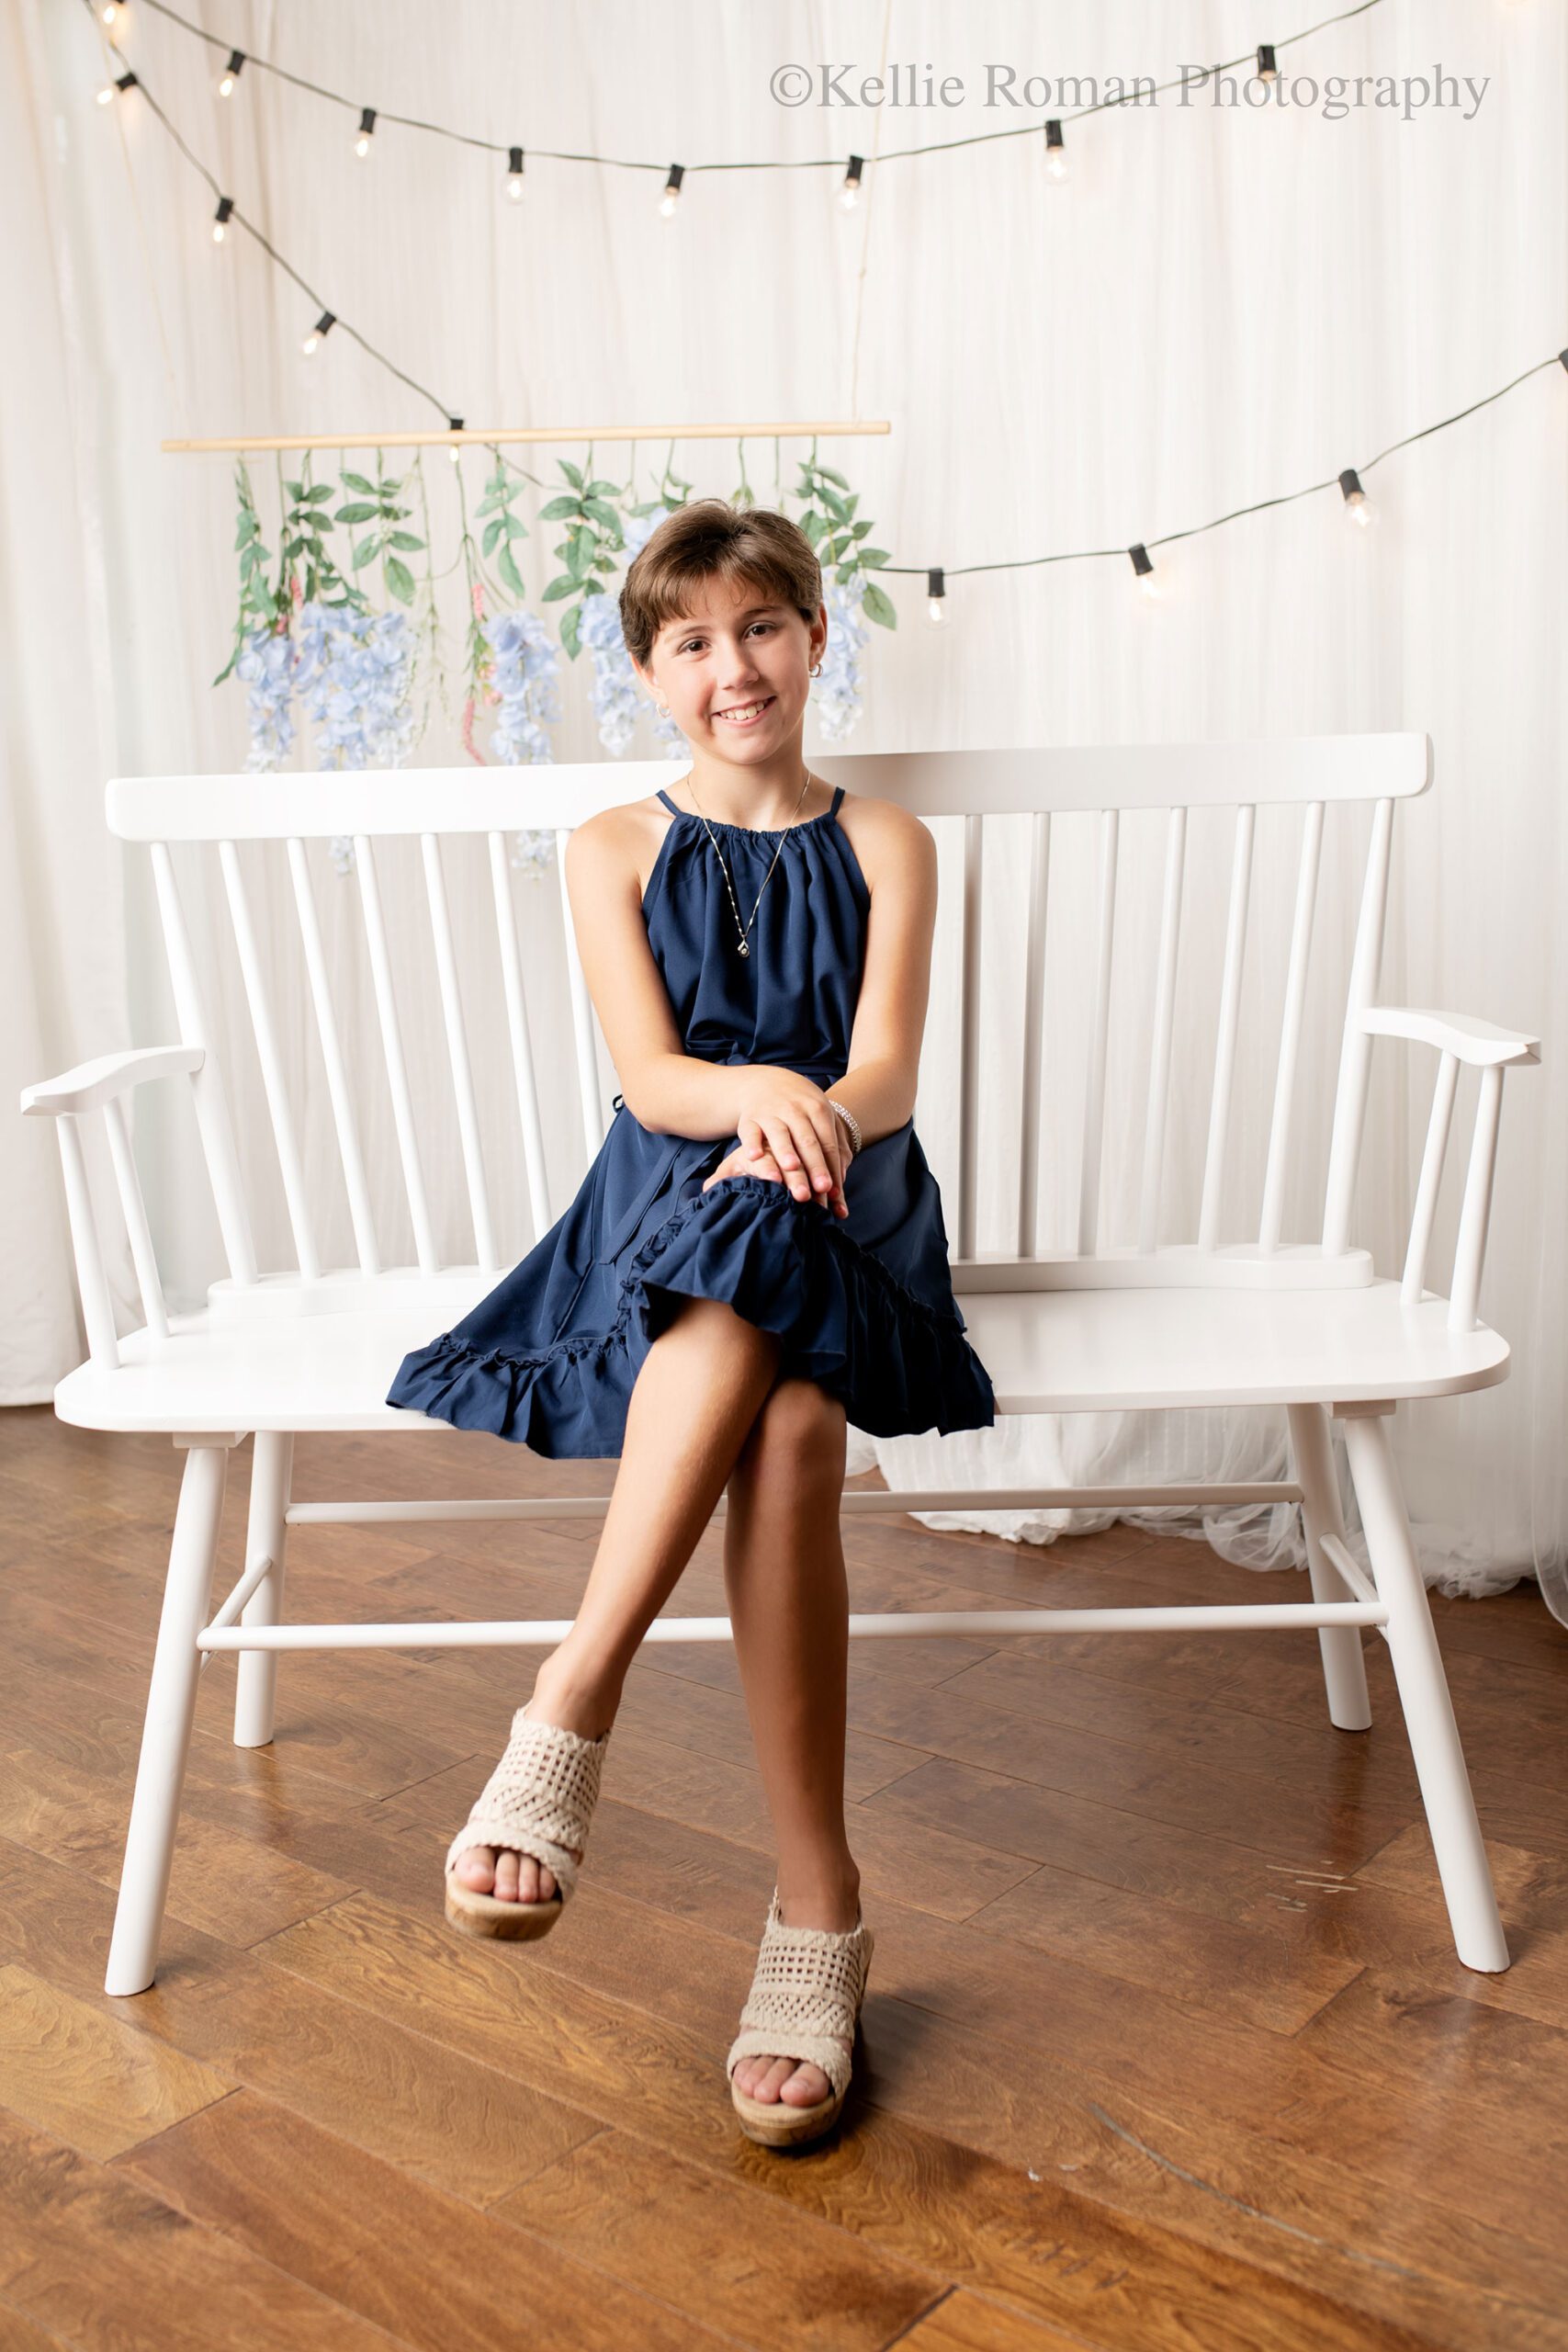 milwaukee birthday photos. 10 year old girl sitting on a white bench with legs crosses. she has a navy dress with tan sandals on. the backdrop is white curtains with lights, and purple hanging flowers.